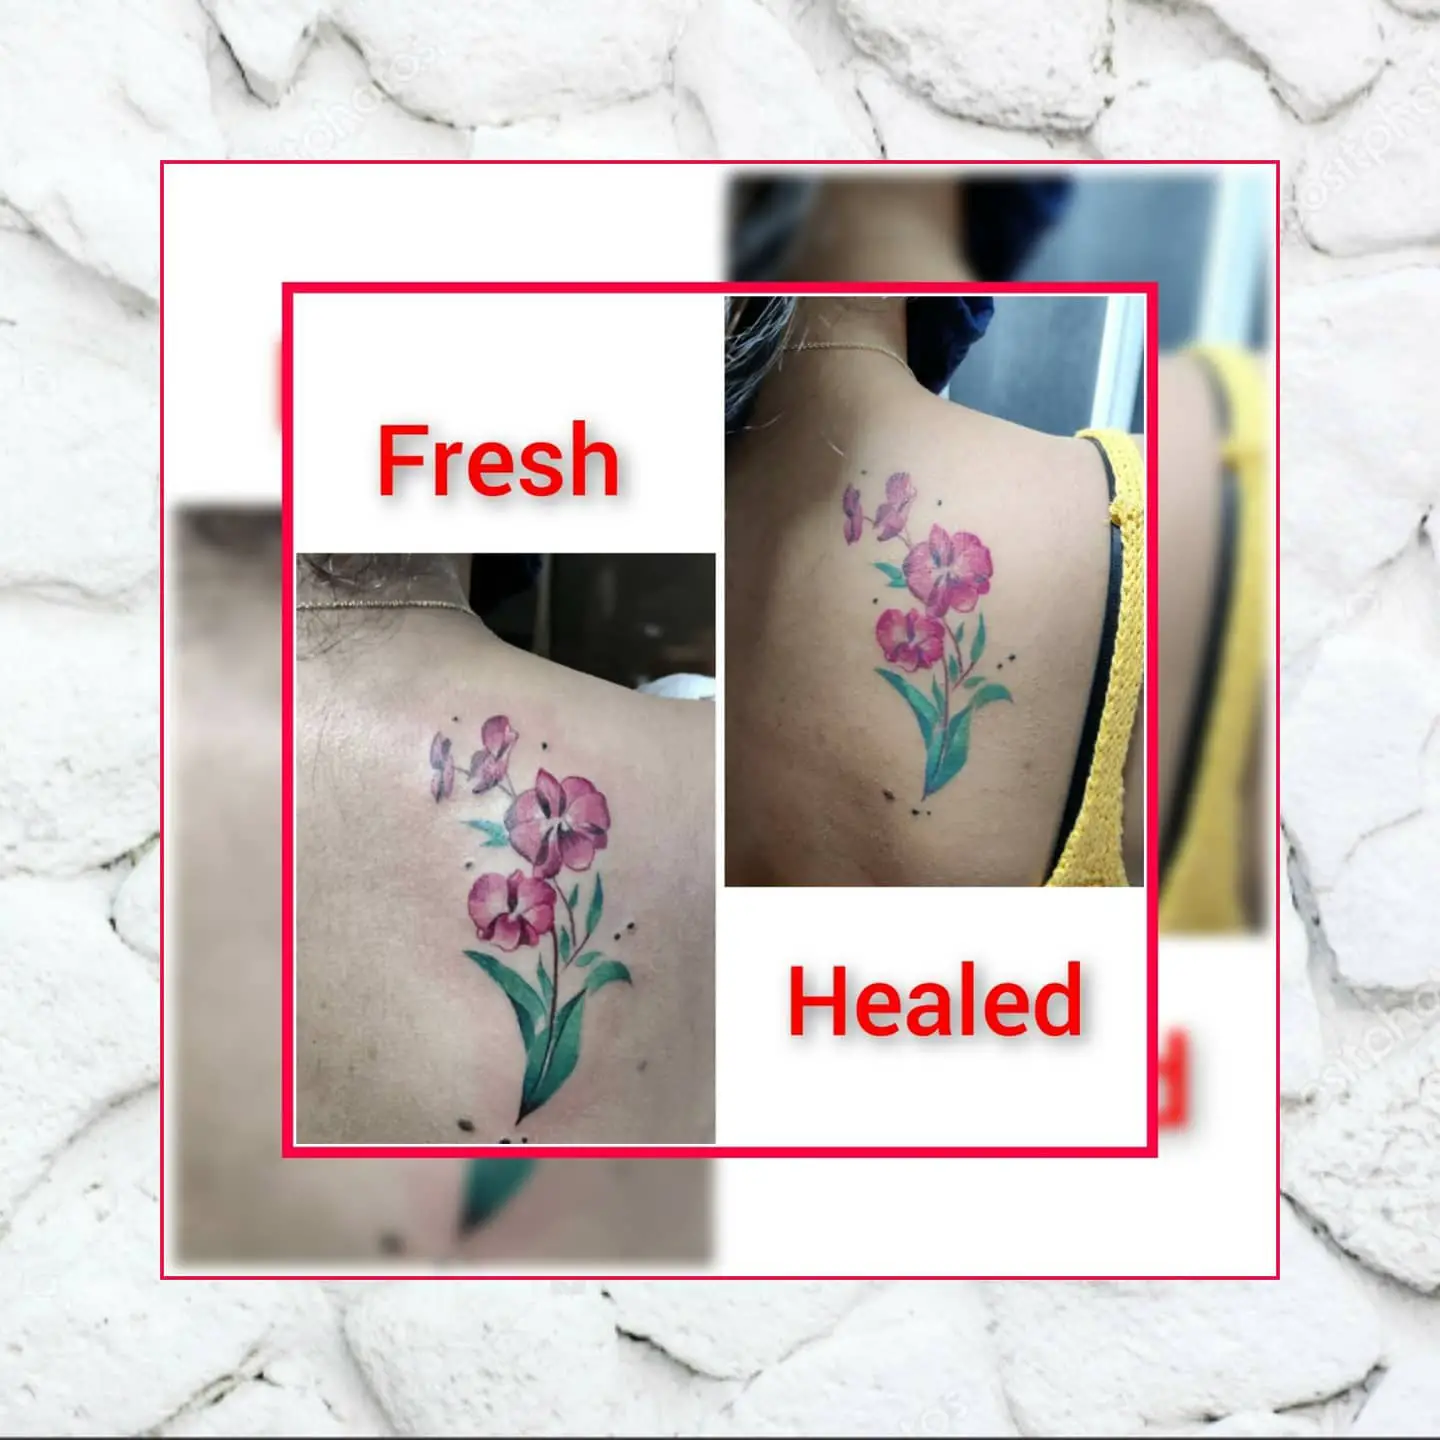 What Are The Three Stages Of The Recovery Process For A Tattoo?